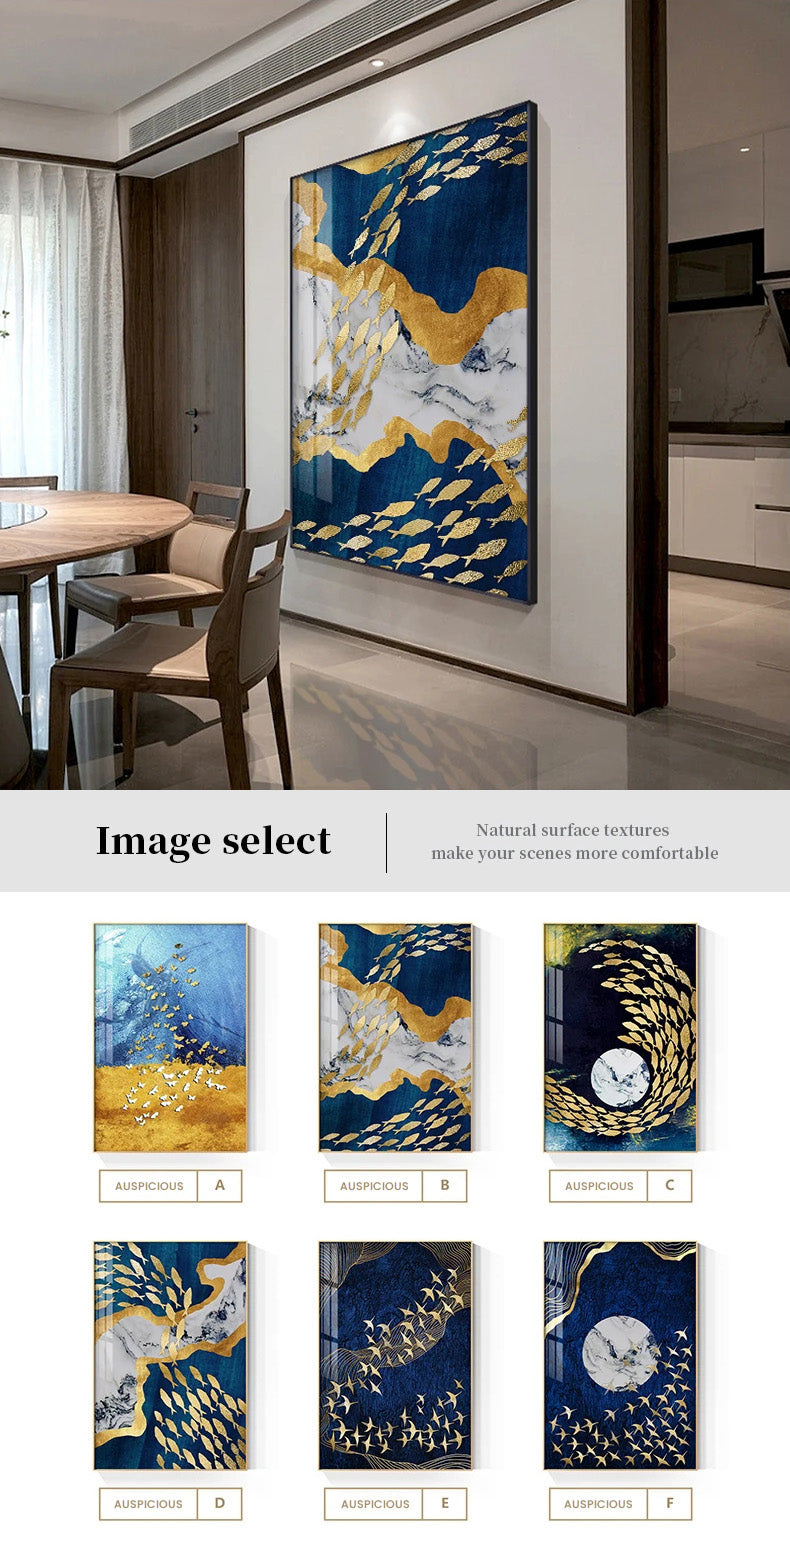 Auspicious Golden Fish In The Deep Blue Wall Art Fine Art Canvas Prints Modern Abstract Pictures For Home Office Boutique Hotel Art Decor